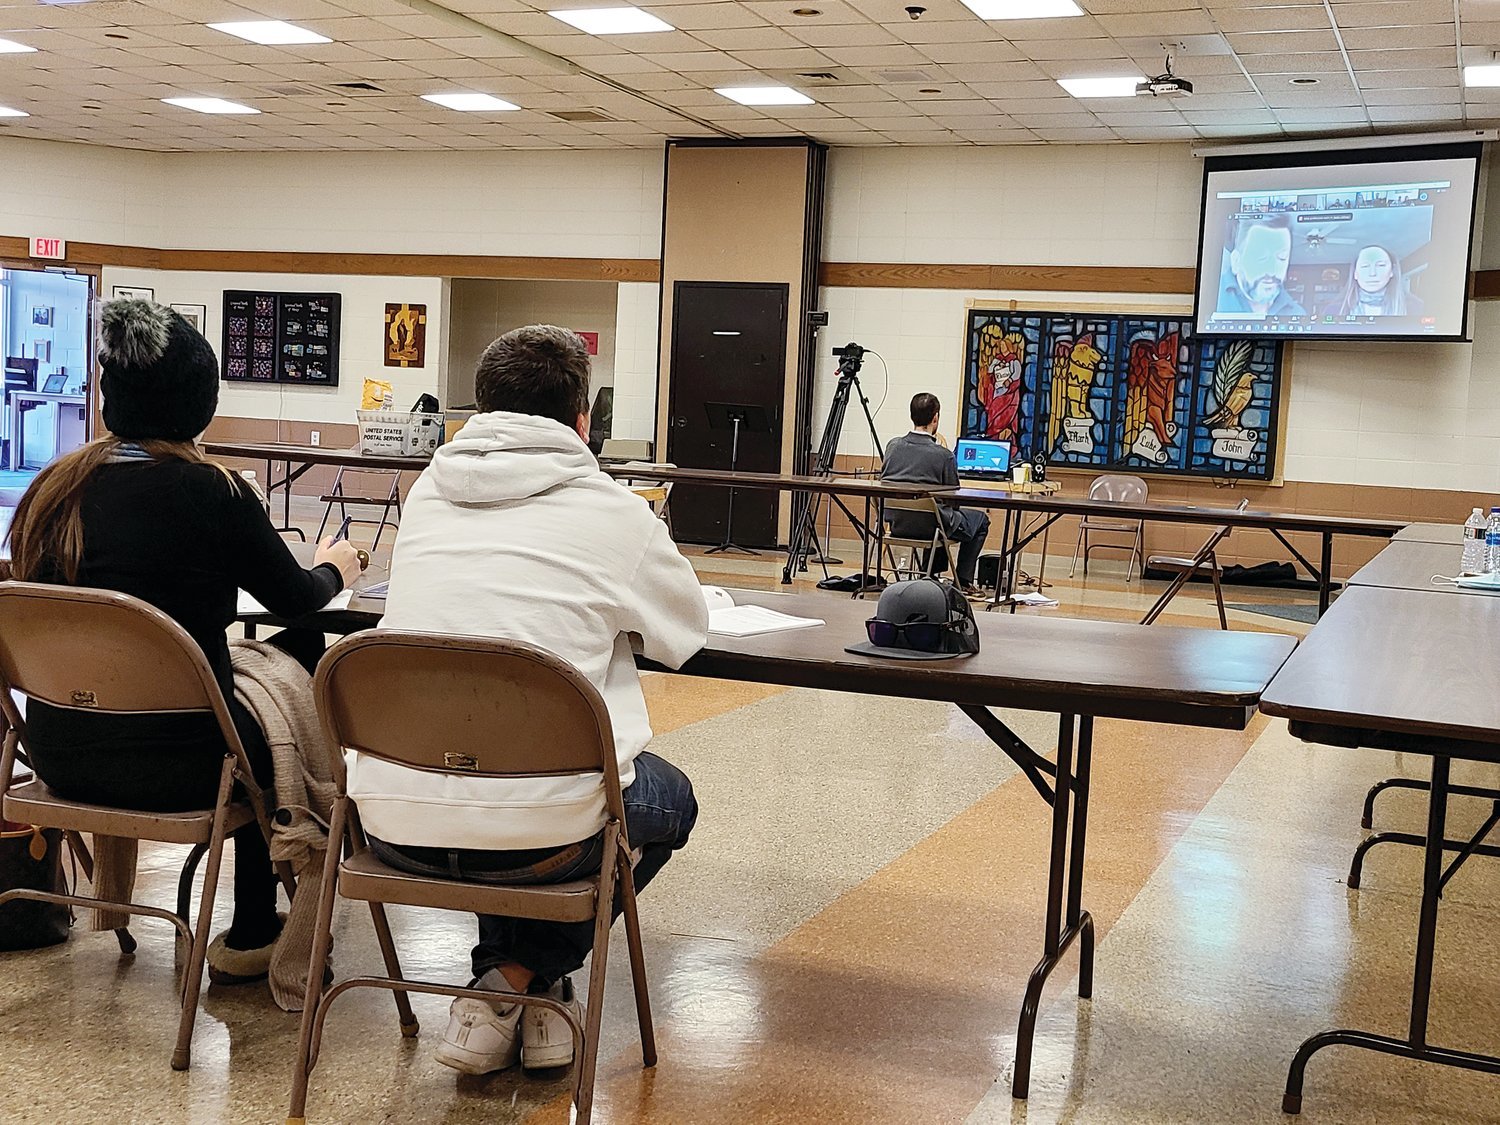 Engaged couples listen to a Zoom presentation during a weekend diocesan marriage preparation program at St. Francis de Sales Church in North Kingstown, organized by the diocesan Office of Marriage Preparation and Enrichment.